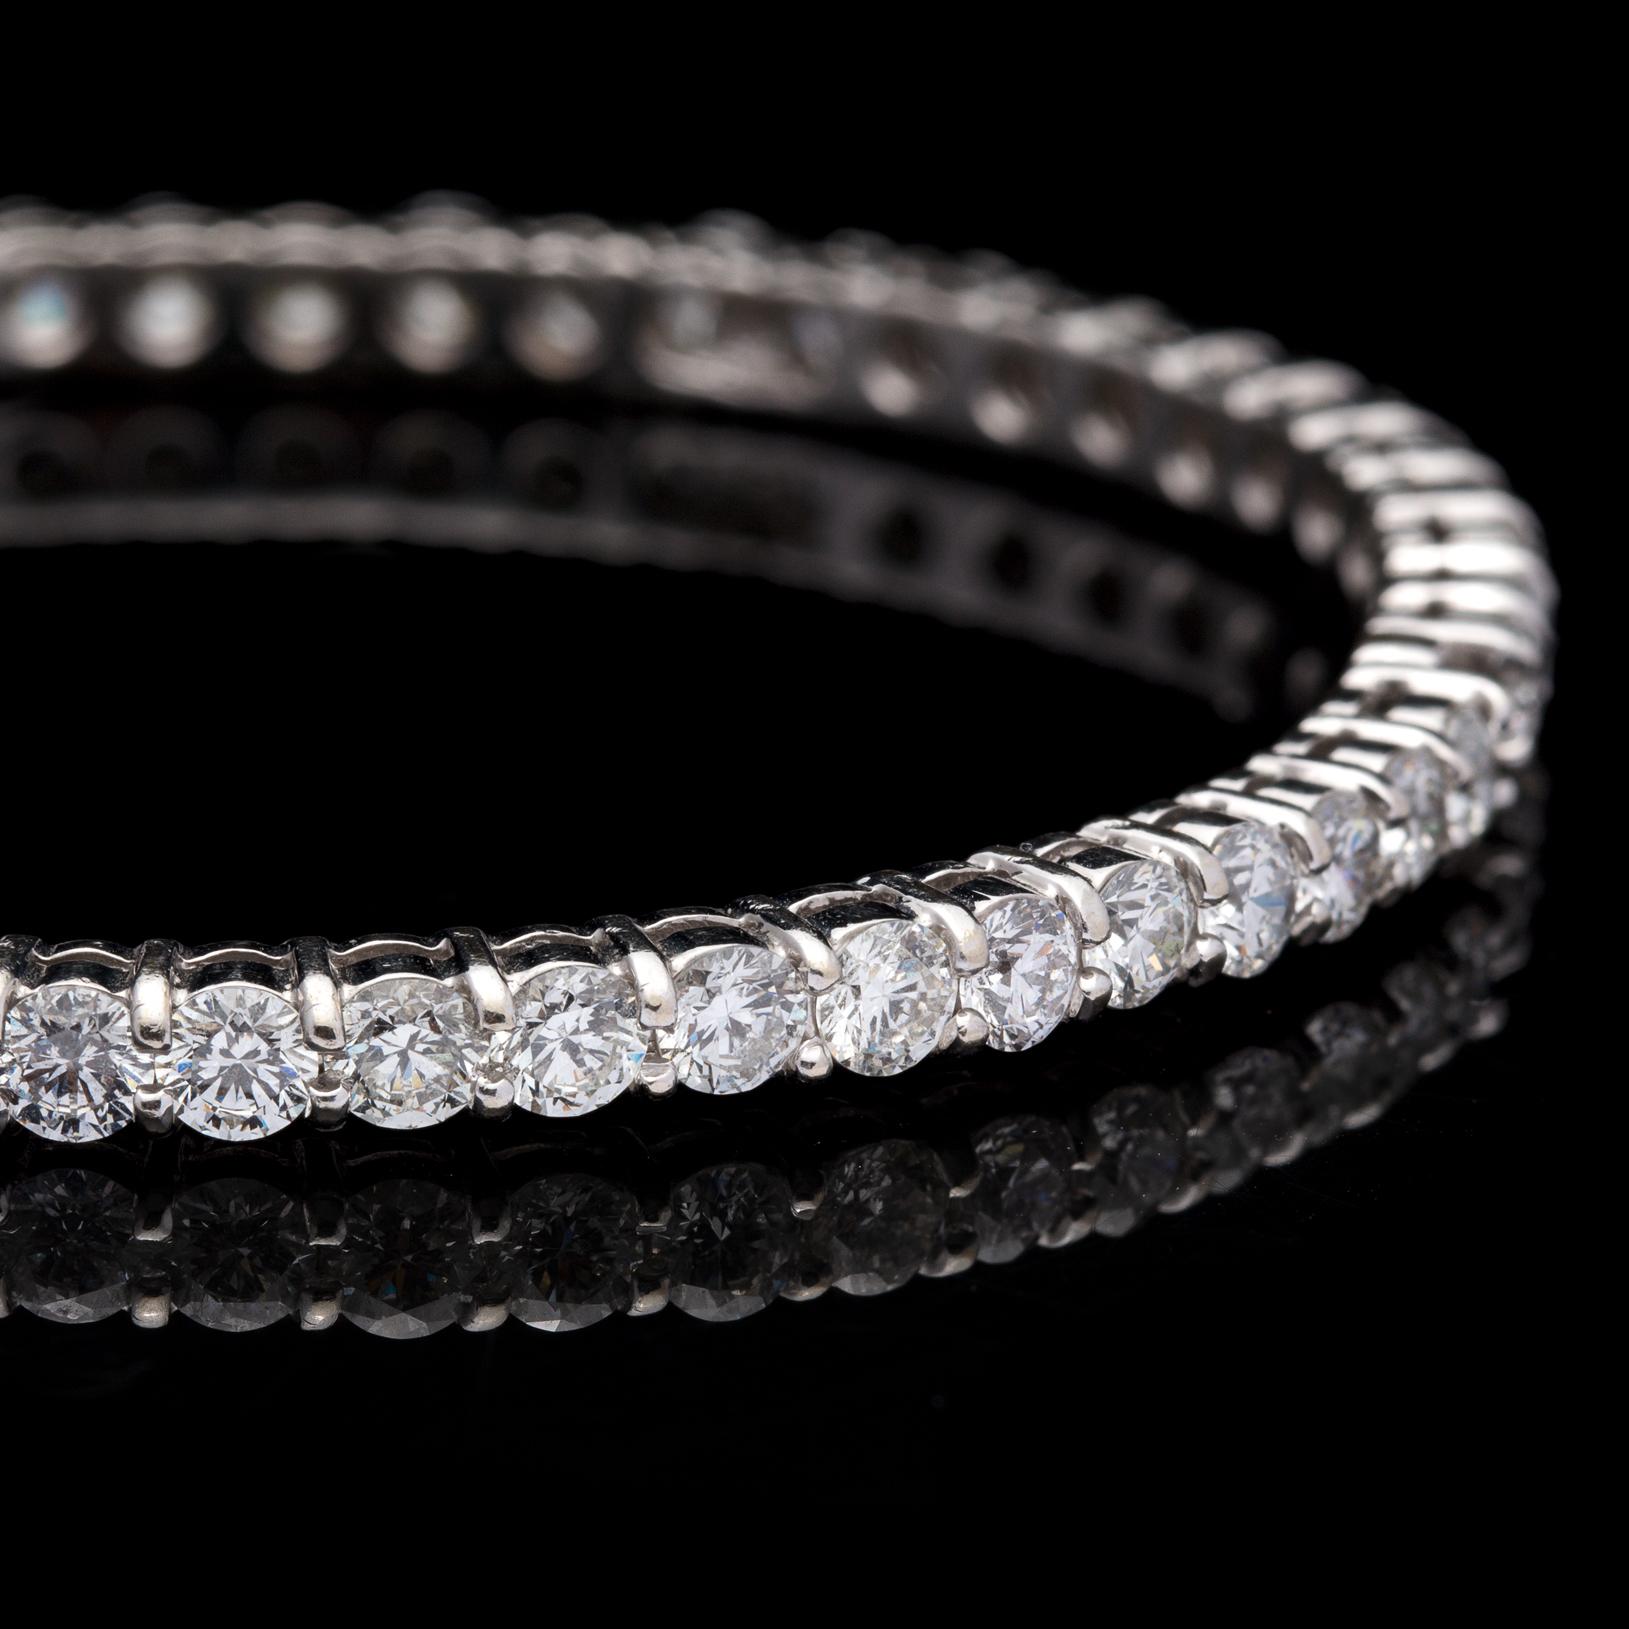 The perfect way to add sparkle to any wrist! This impressive diamond eternity bangle features 51 exceptionally well matched round brilliant diamonds delicately set in 14 karat white gold. With a total diamond weight of approximately 10 carats, this